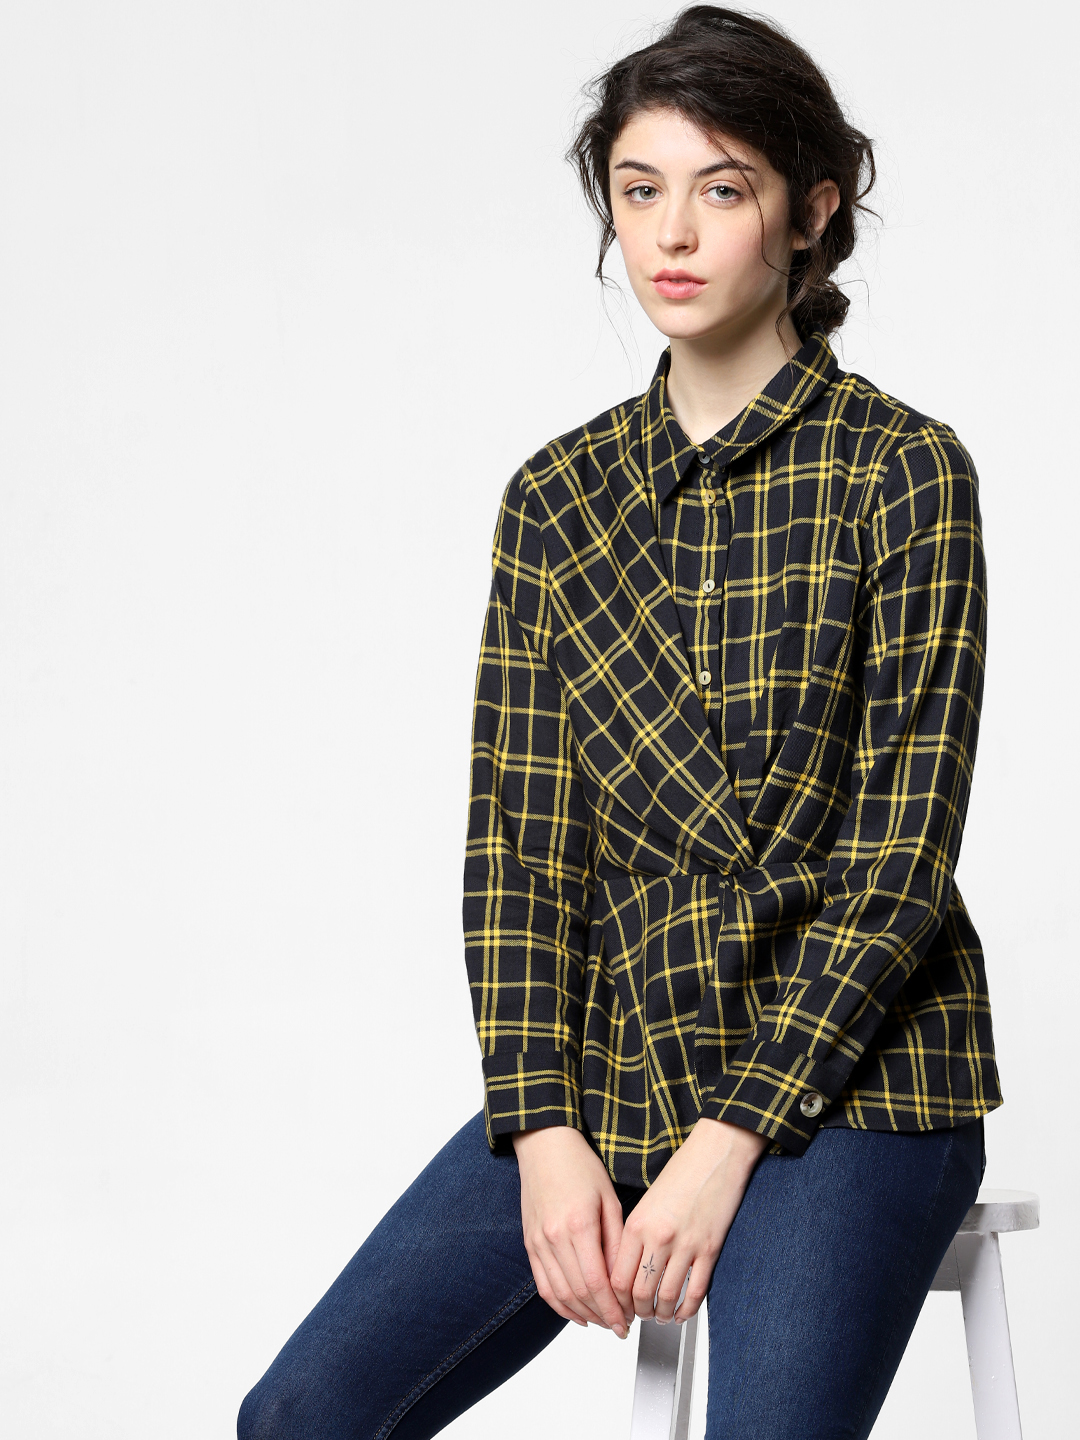 ONLY Women Black & Mustard Yellow Regular Fit Checked Twist Casual Shirt Price in India